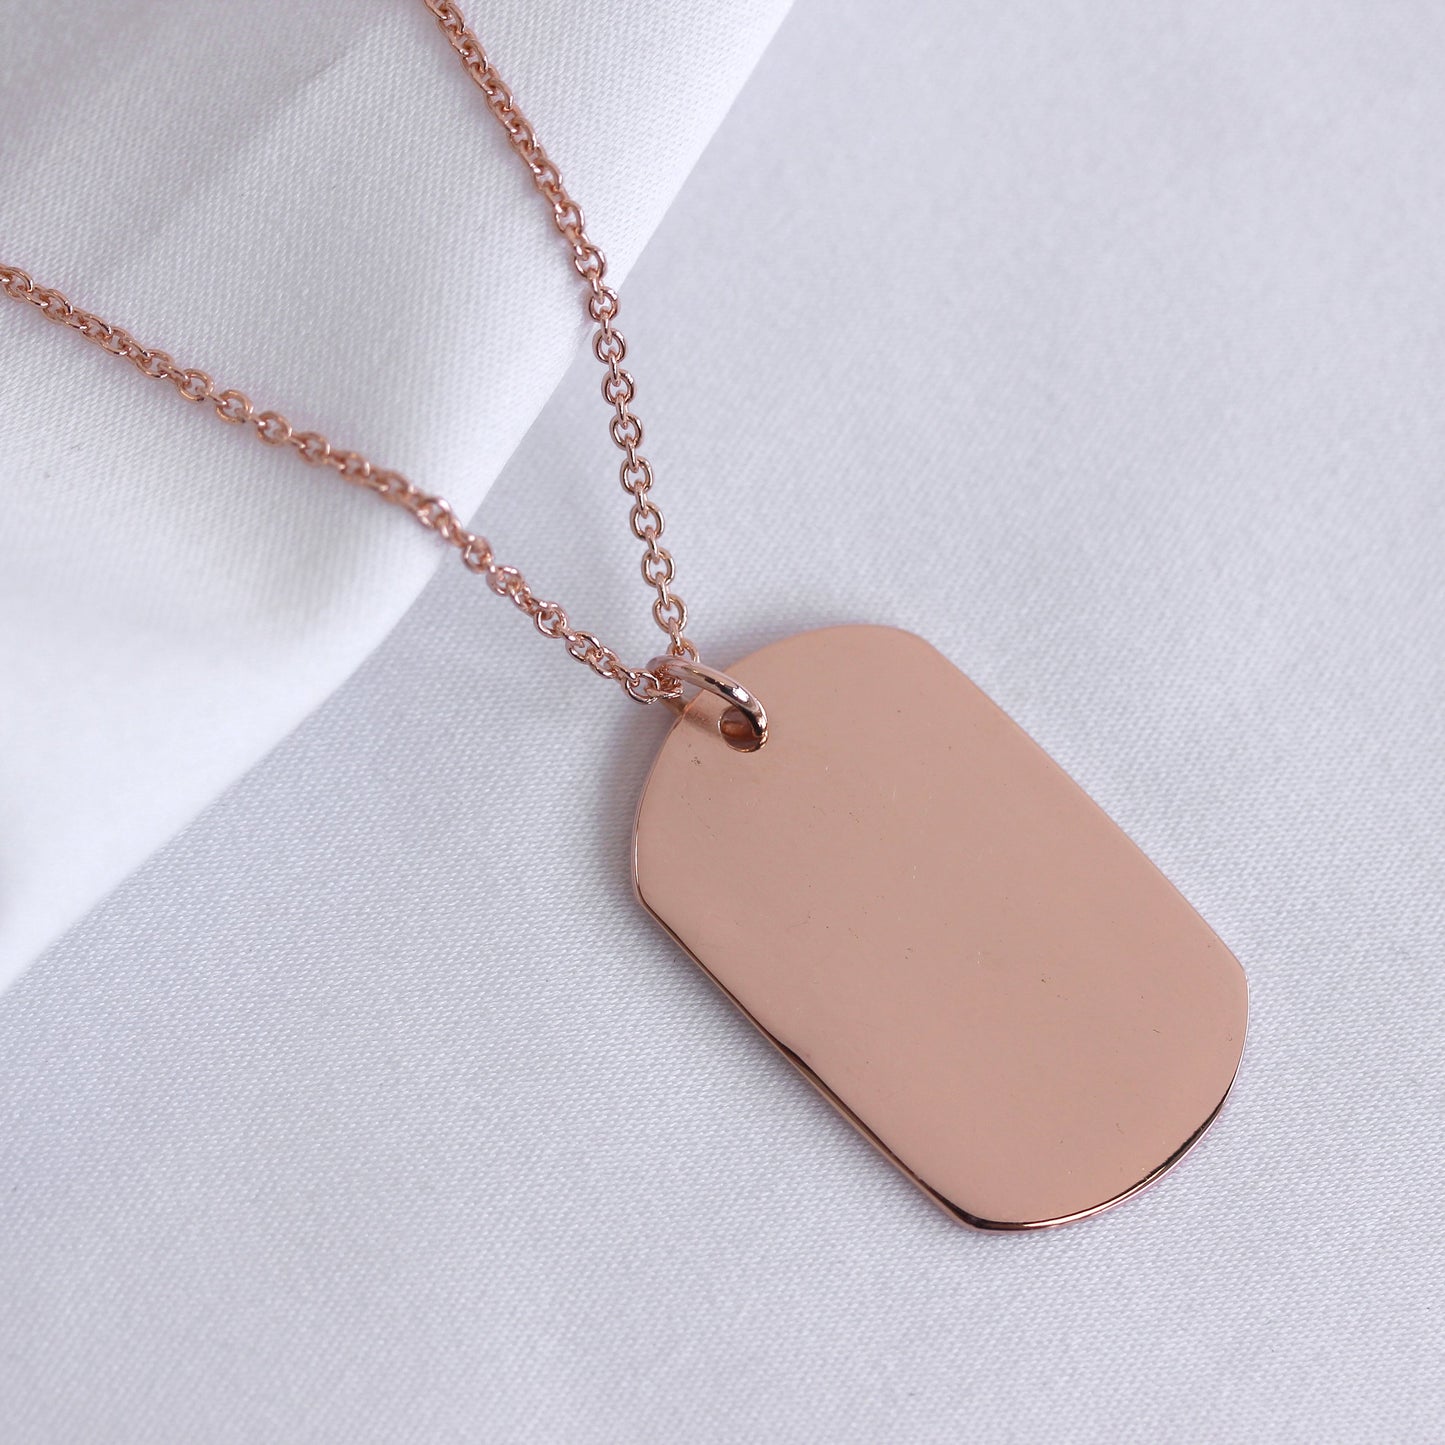 Large Rose Gold Plated Sterling Silver Dog Tag Necklace 16 - 24 Inches